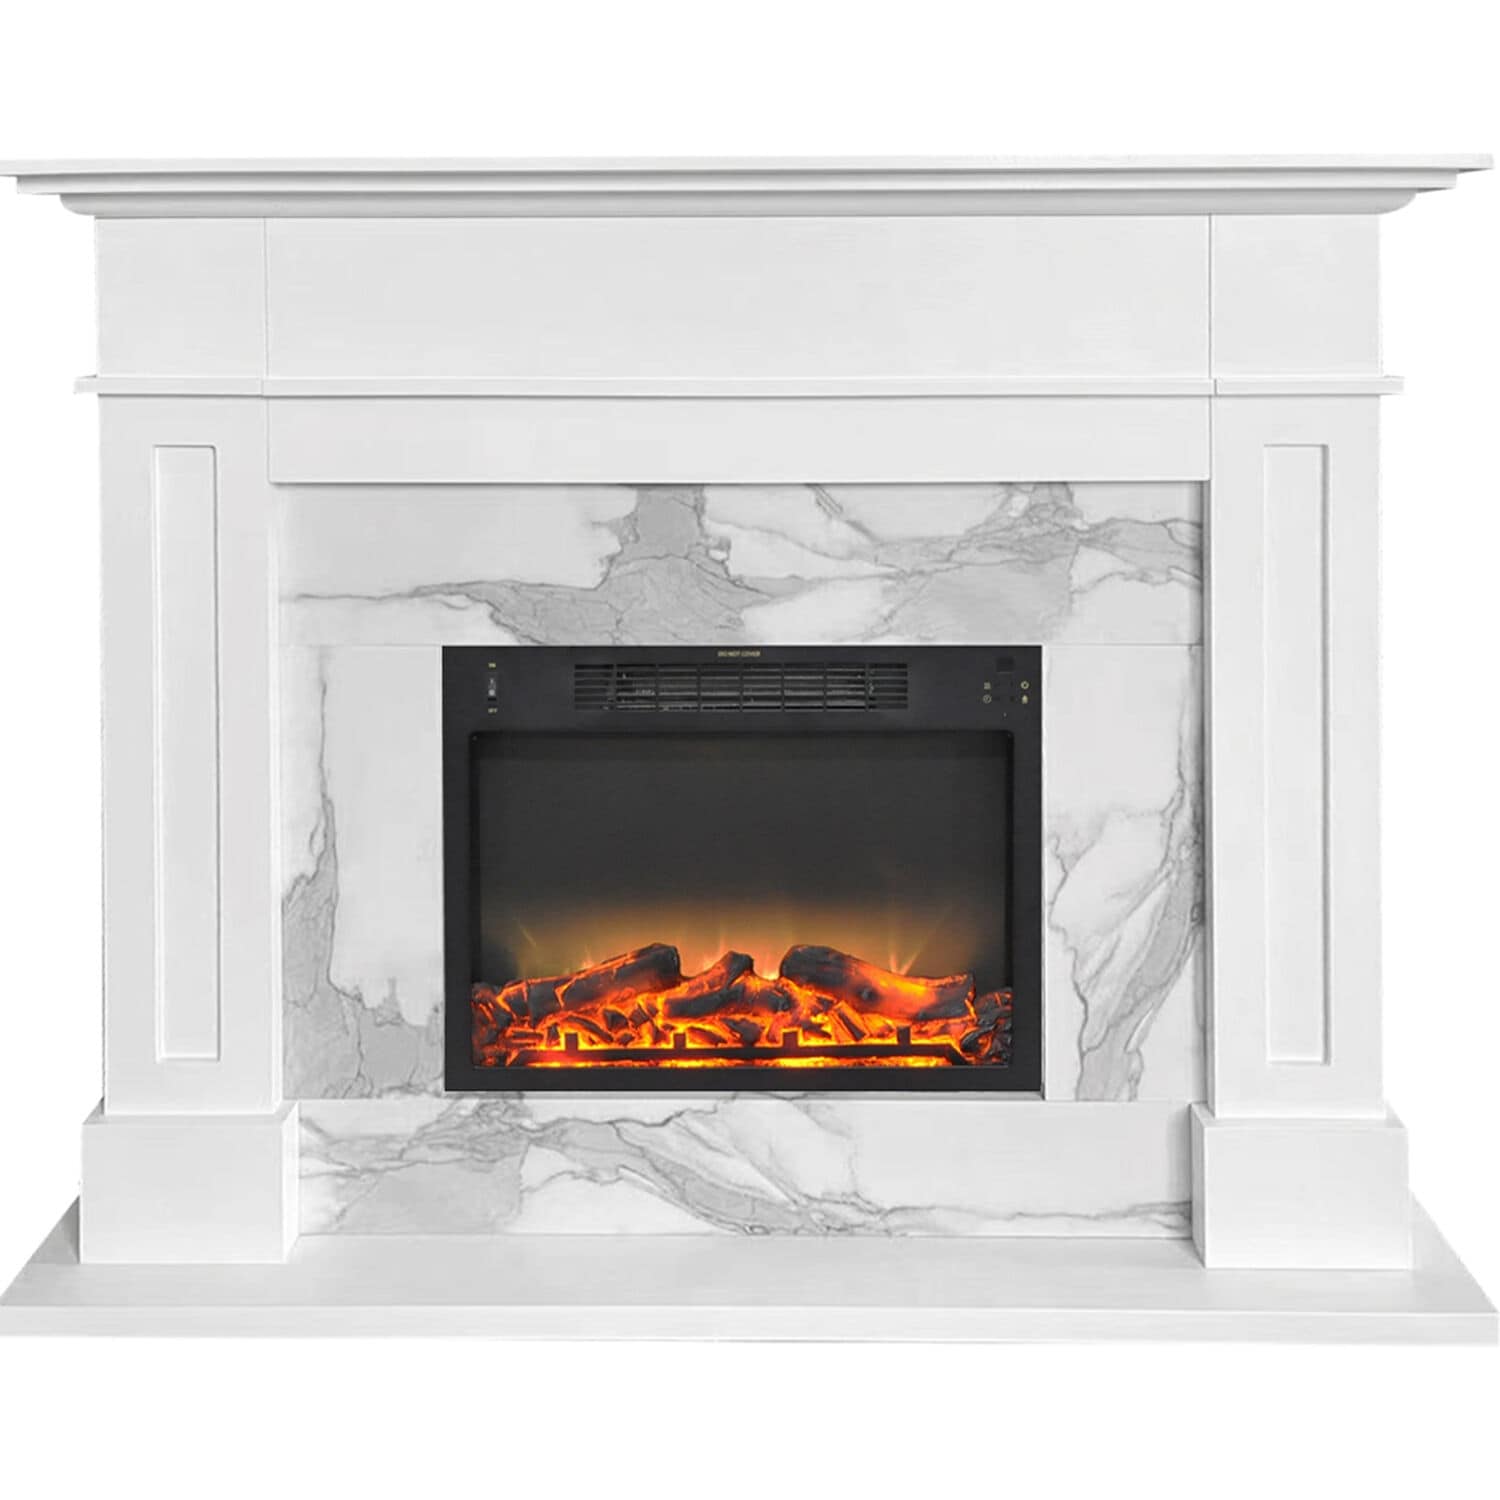 Cambridge Sofia 57-In. Electric Fireplace with Faux Charred Log Display insert and White Mantel